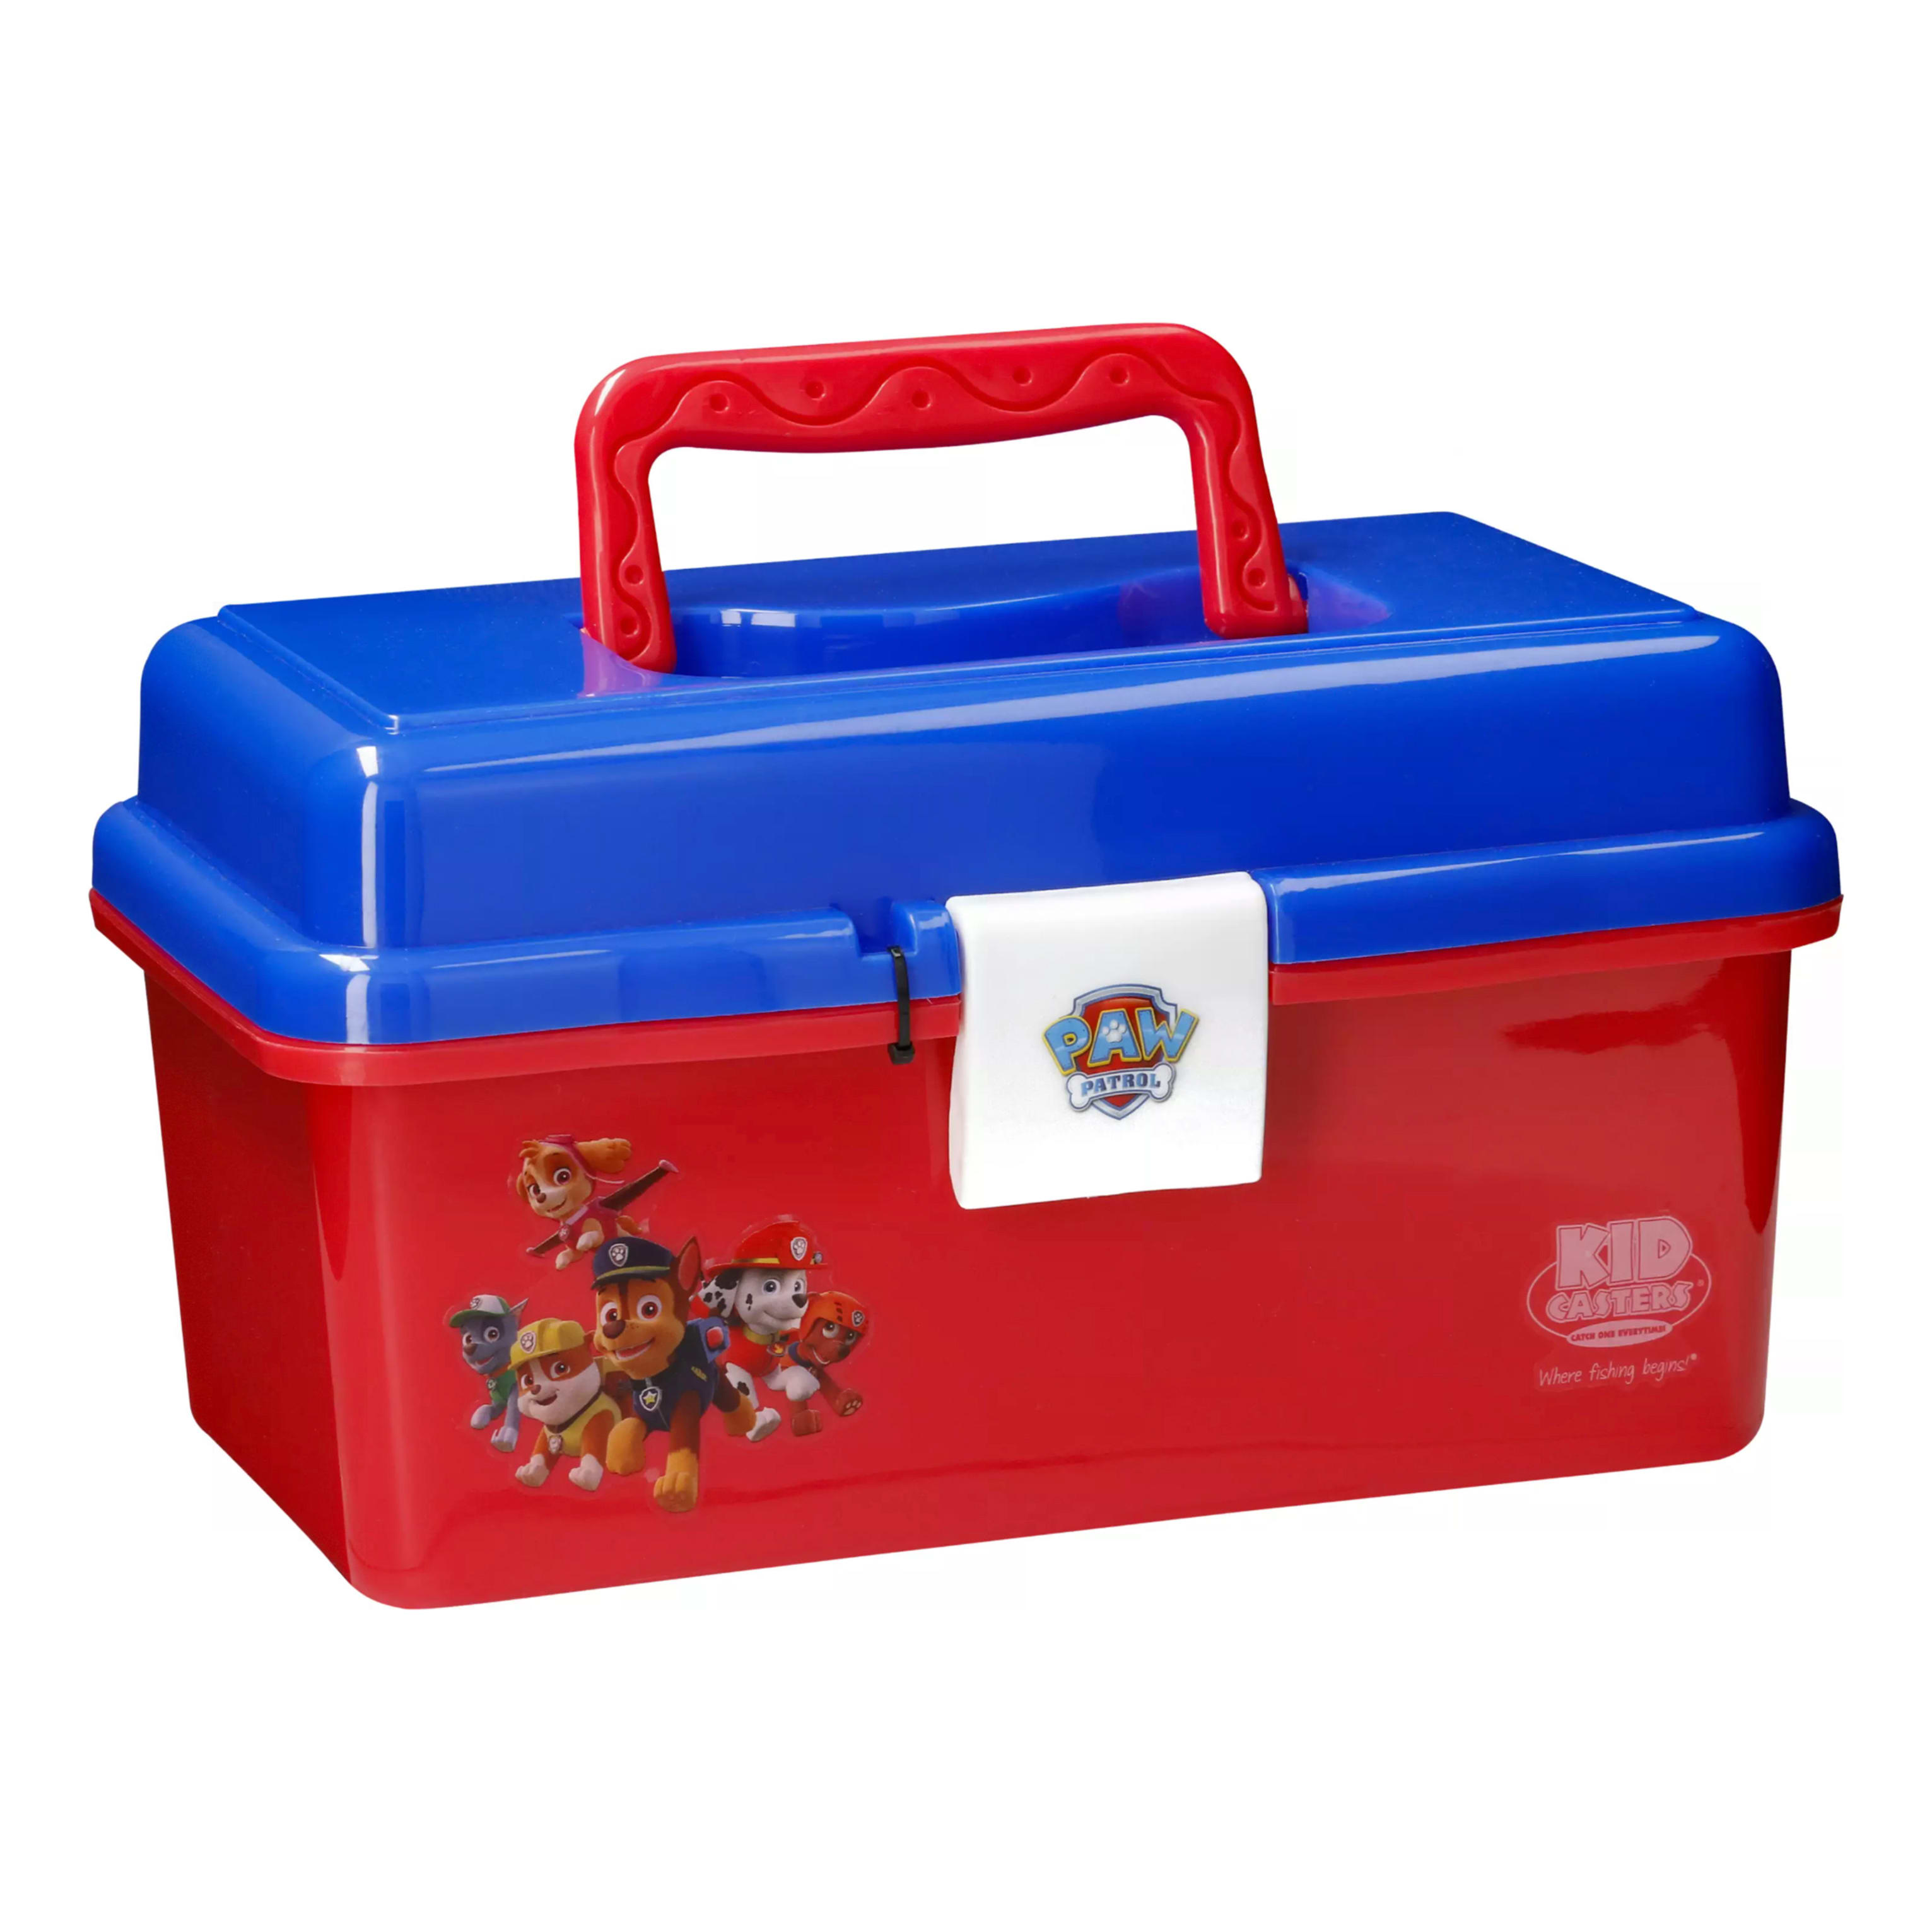 Kid Casters PAW Patrol Tackle Box for Kids - Red/Blue